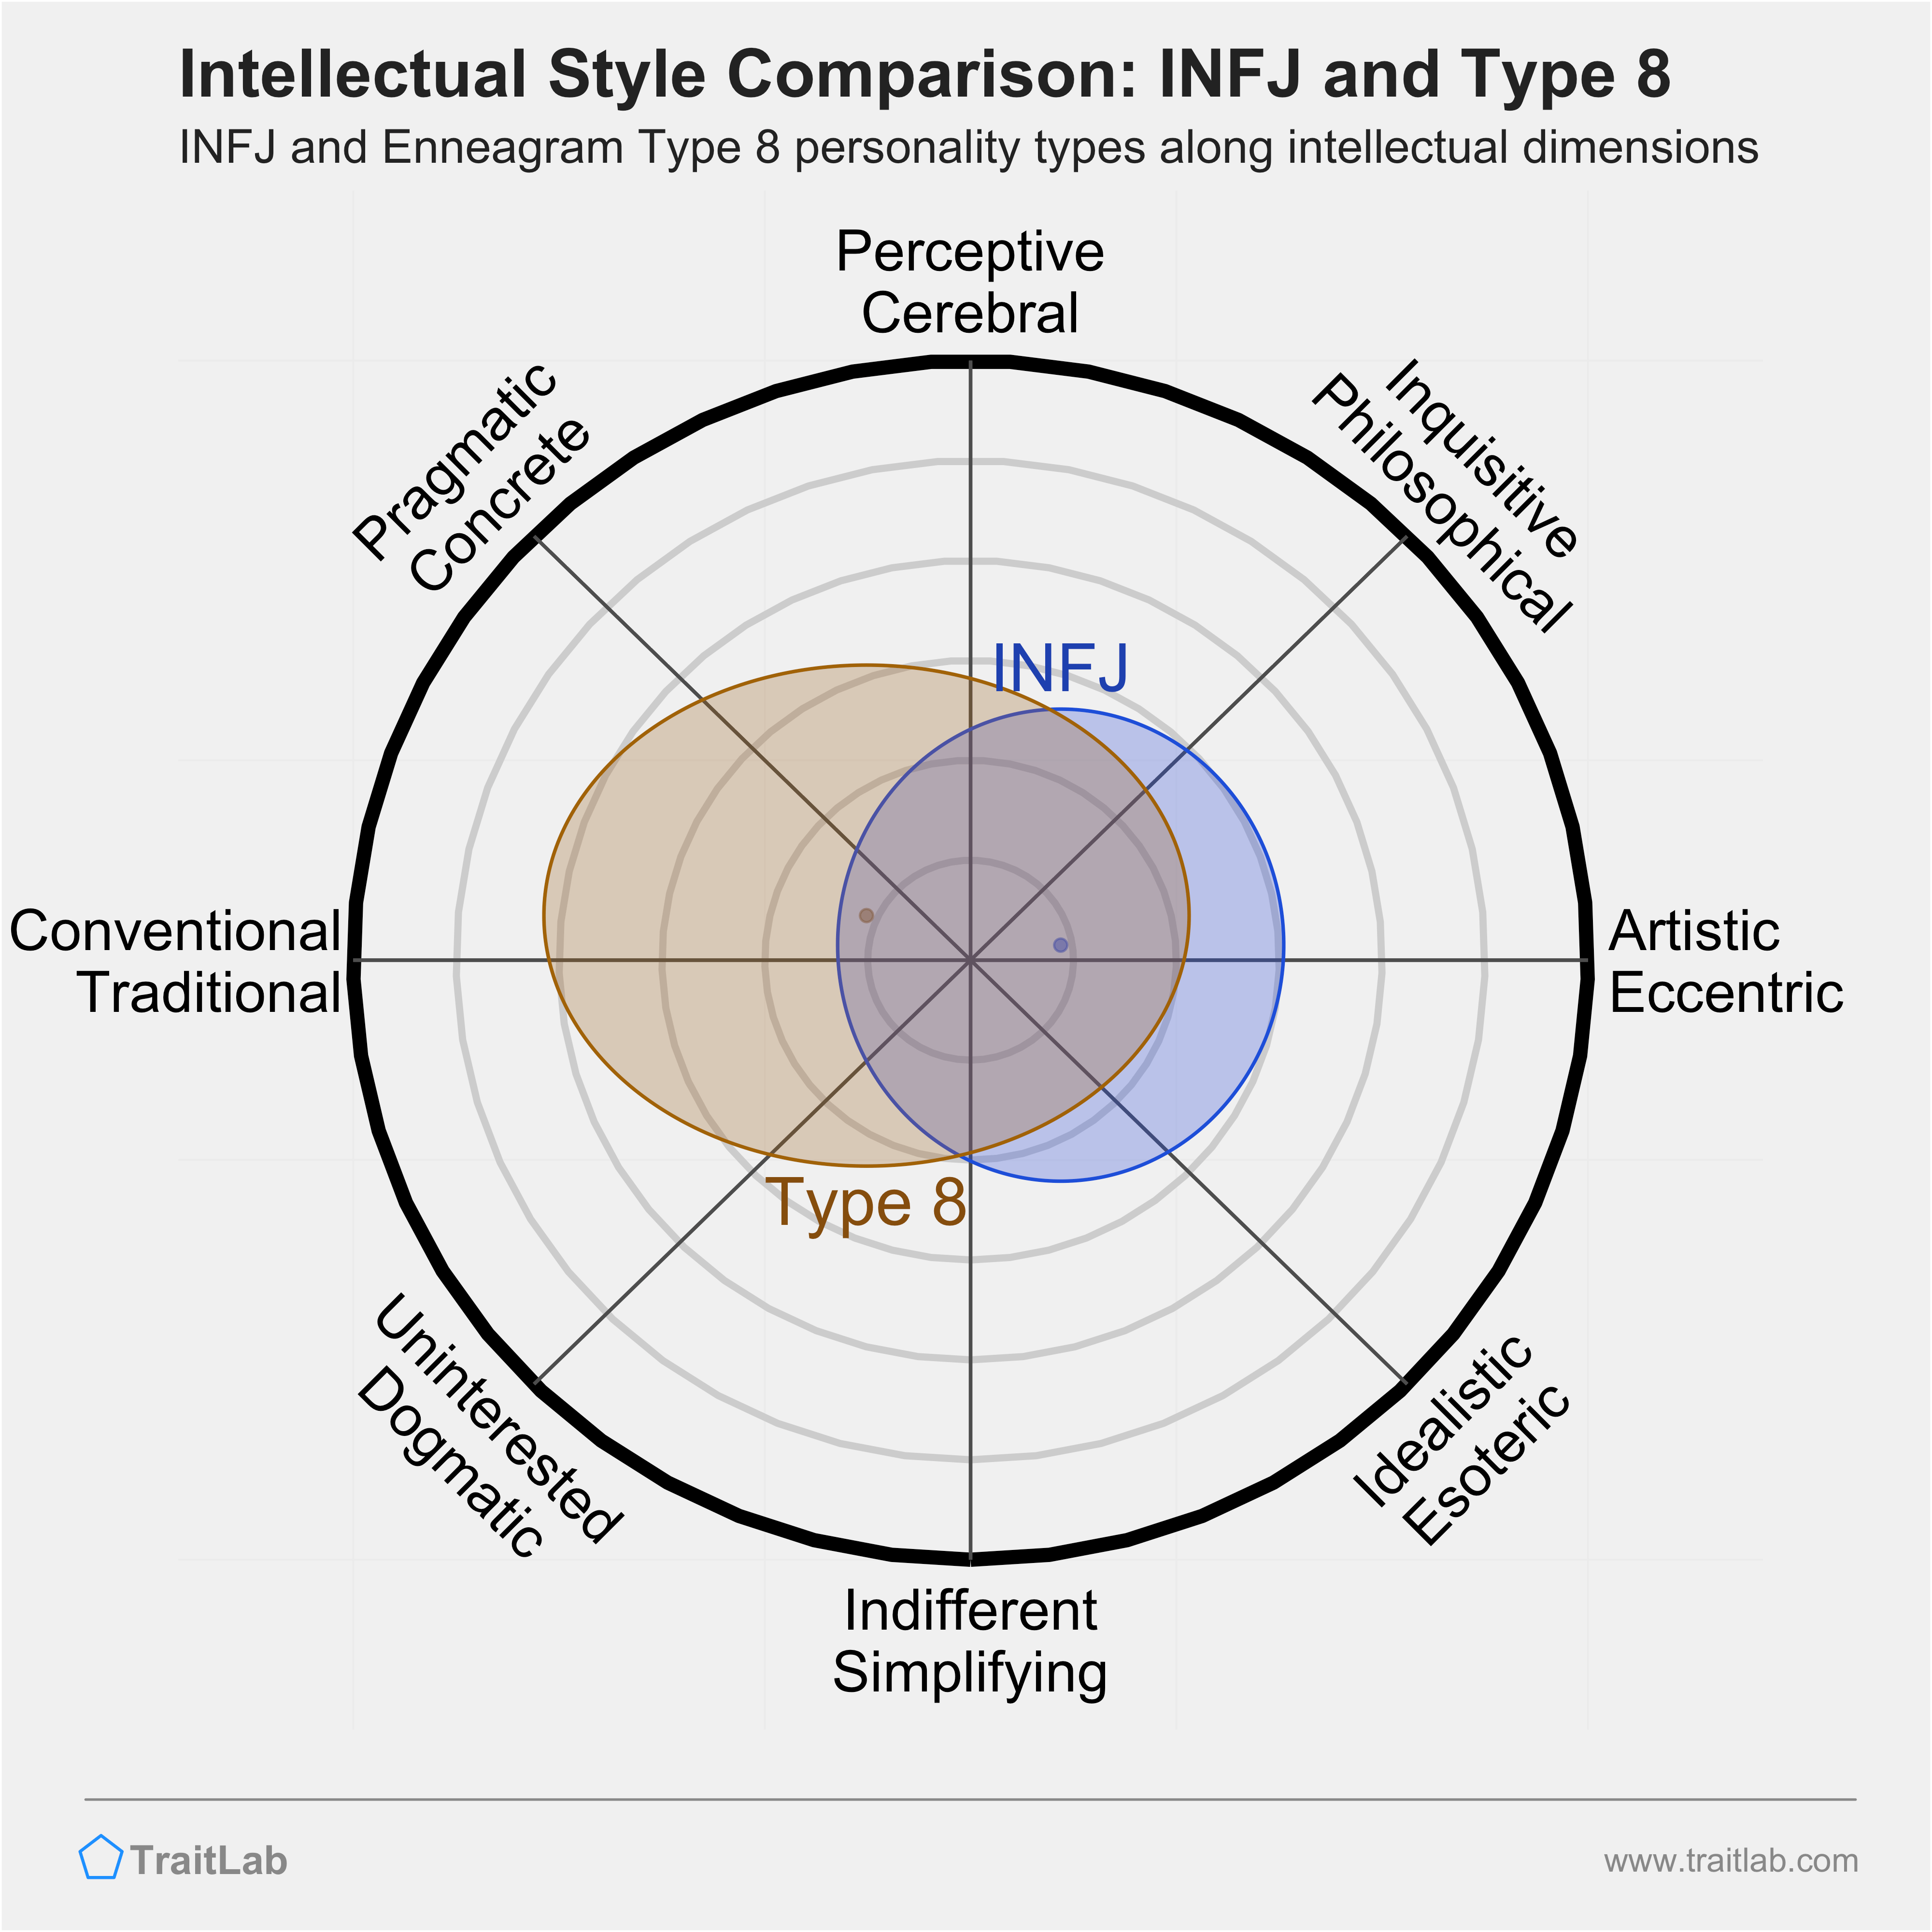 INFJ and Type 8 comparison across intellectual dimensions